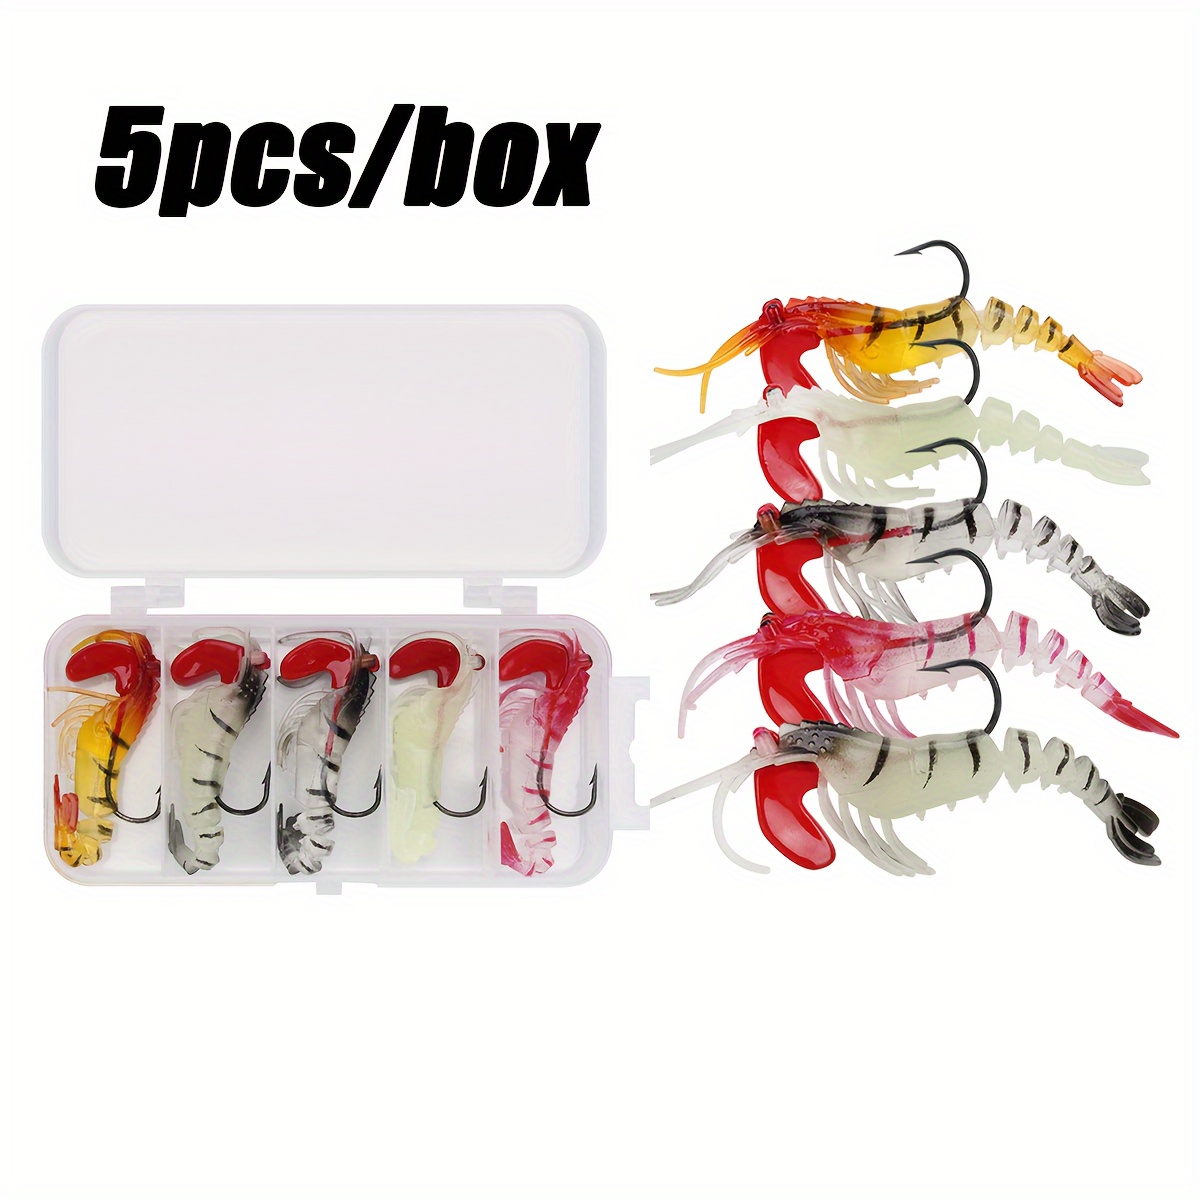 8pcs Soft Luminous Shrimp Fishing Lure Set Artificial Shrimp Bait with  Hooks Fishing Tackles for Freshwater Saltwater Bass Trout Catfish Salmon,  Topwater Lures -  Canada